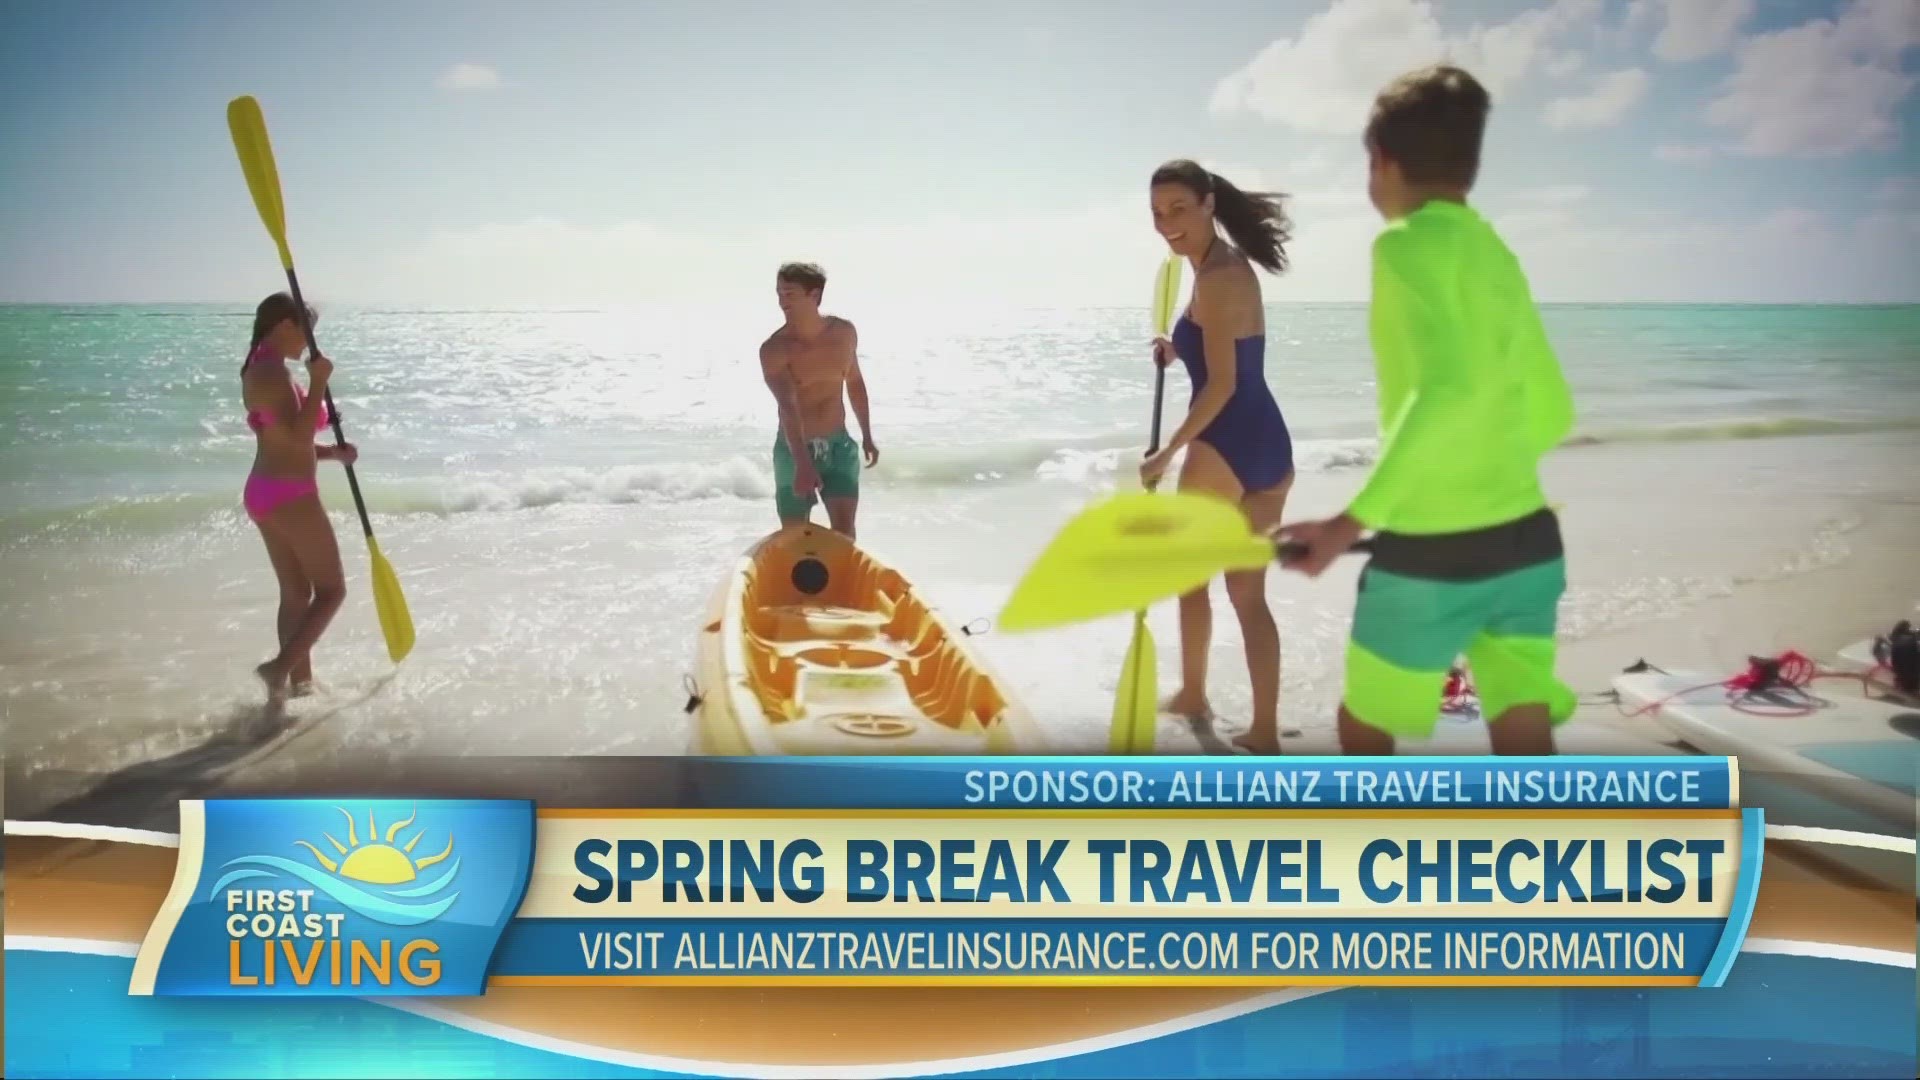 Allianz Partners’ senior medical consultant Dr. Jim Evans is here to talk to us about Spring Break travel.